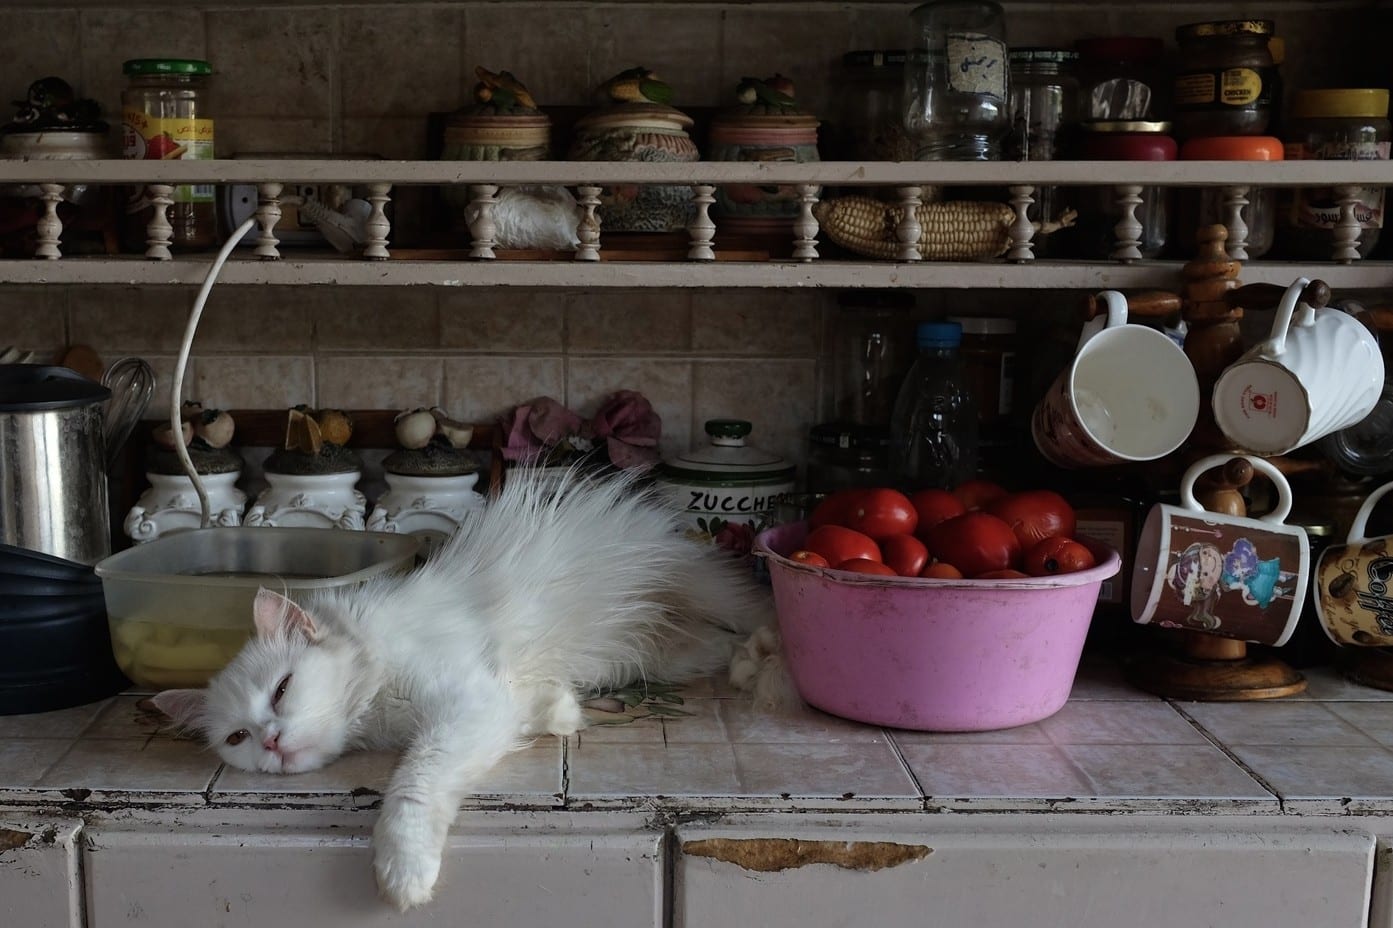 Photographer Erica Canepa’s ‘The Cat Lady of the Nile’